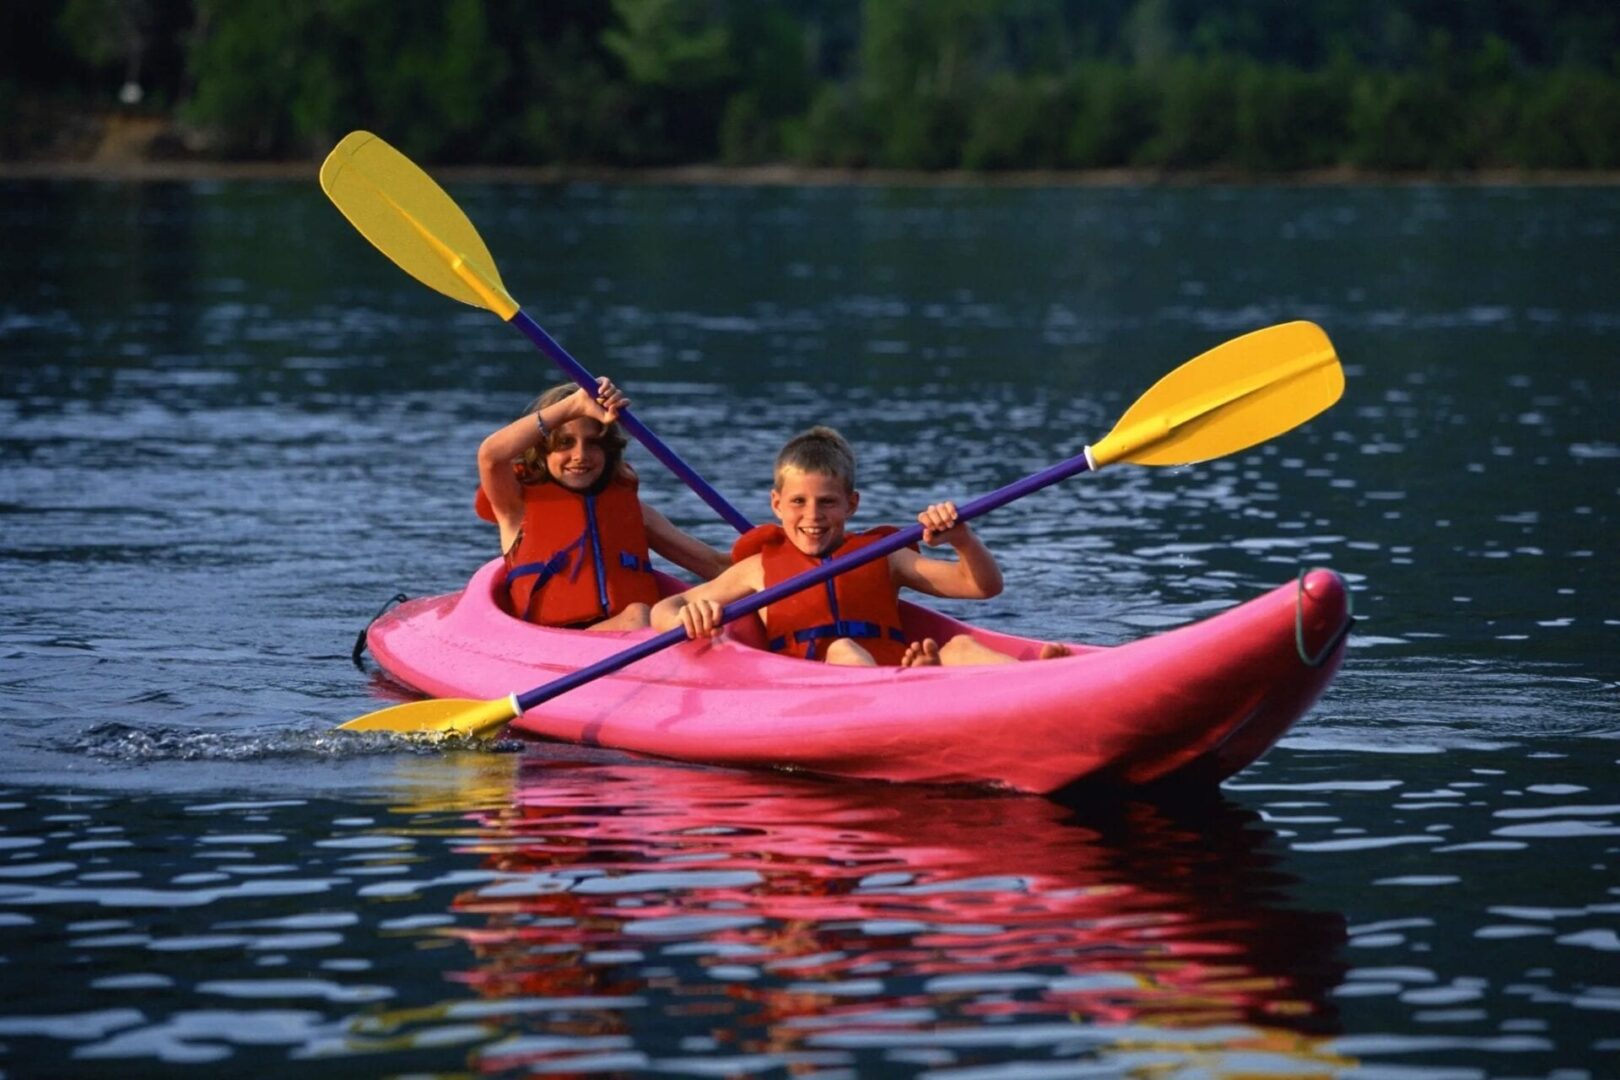 Two kids in a red kayak boat rowing using yellow and violet paddles